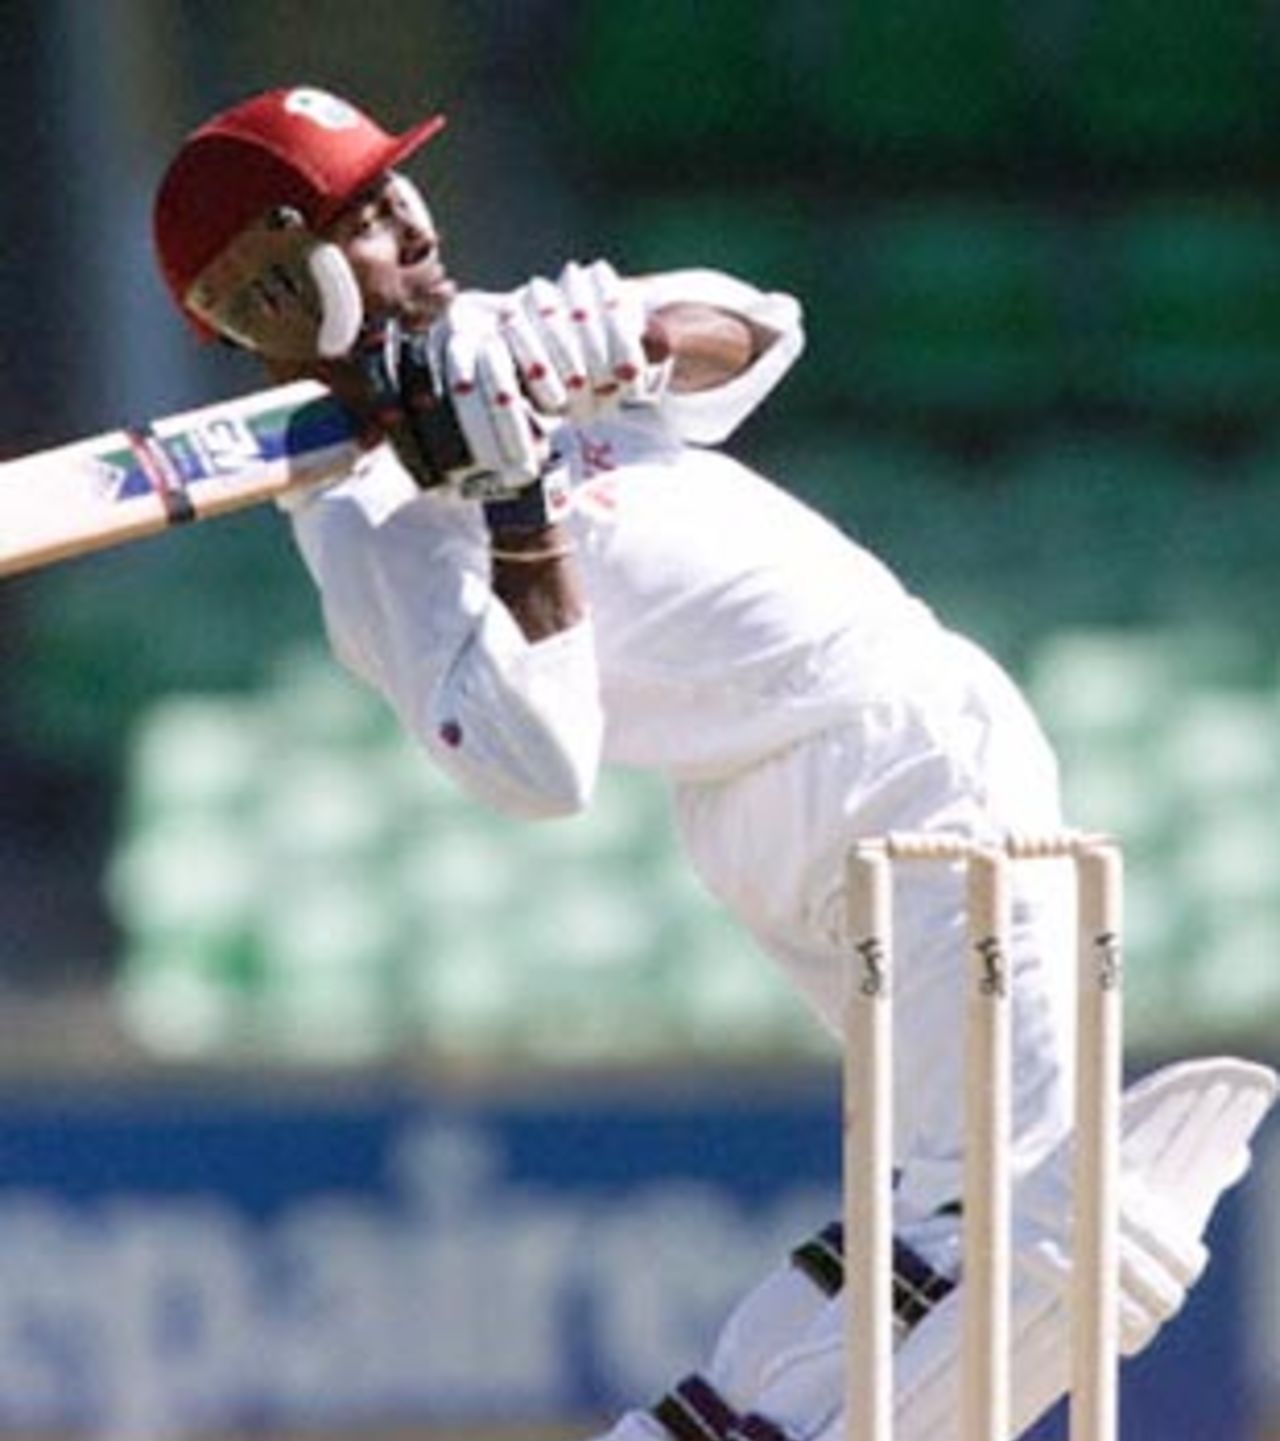 West Indies batsman and vice-captain Sherwin Campbell sways back as he avoids a bouncer from bowler Gavin Swan during a four day match against the Western Warriors at the WACA ground in Perth 11 November 2000. Campbell is currently 82 not out, with the West Indies 4-181 at tea.